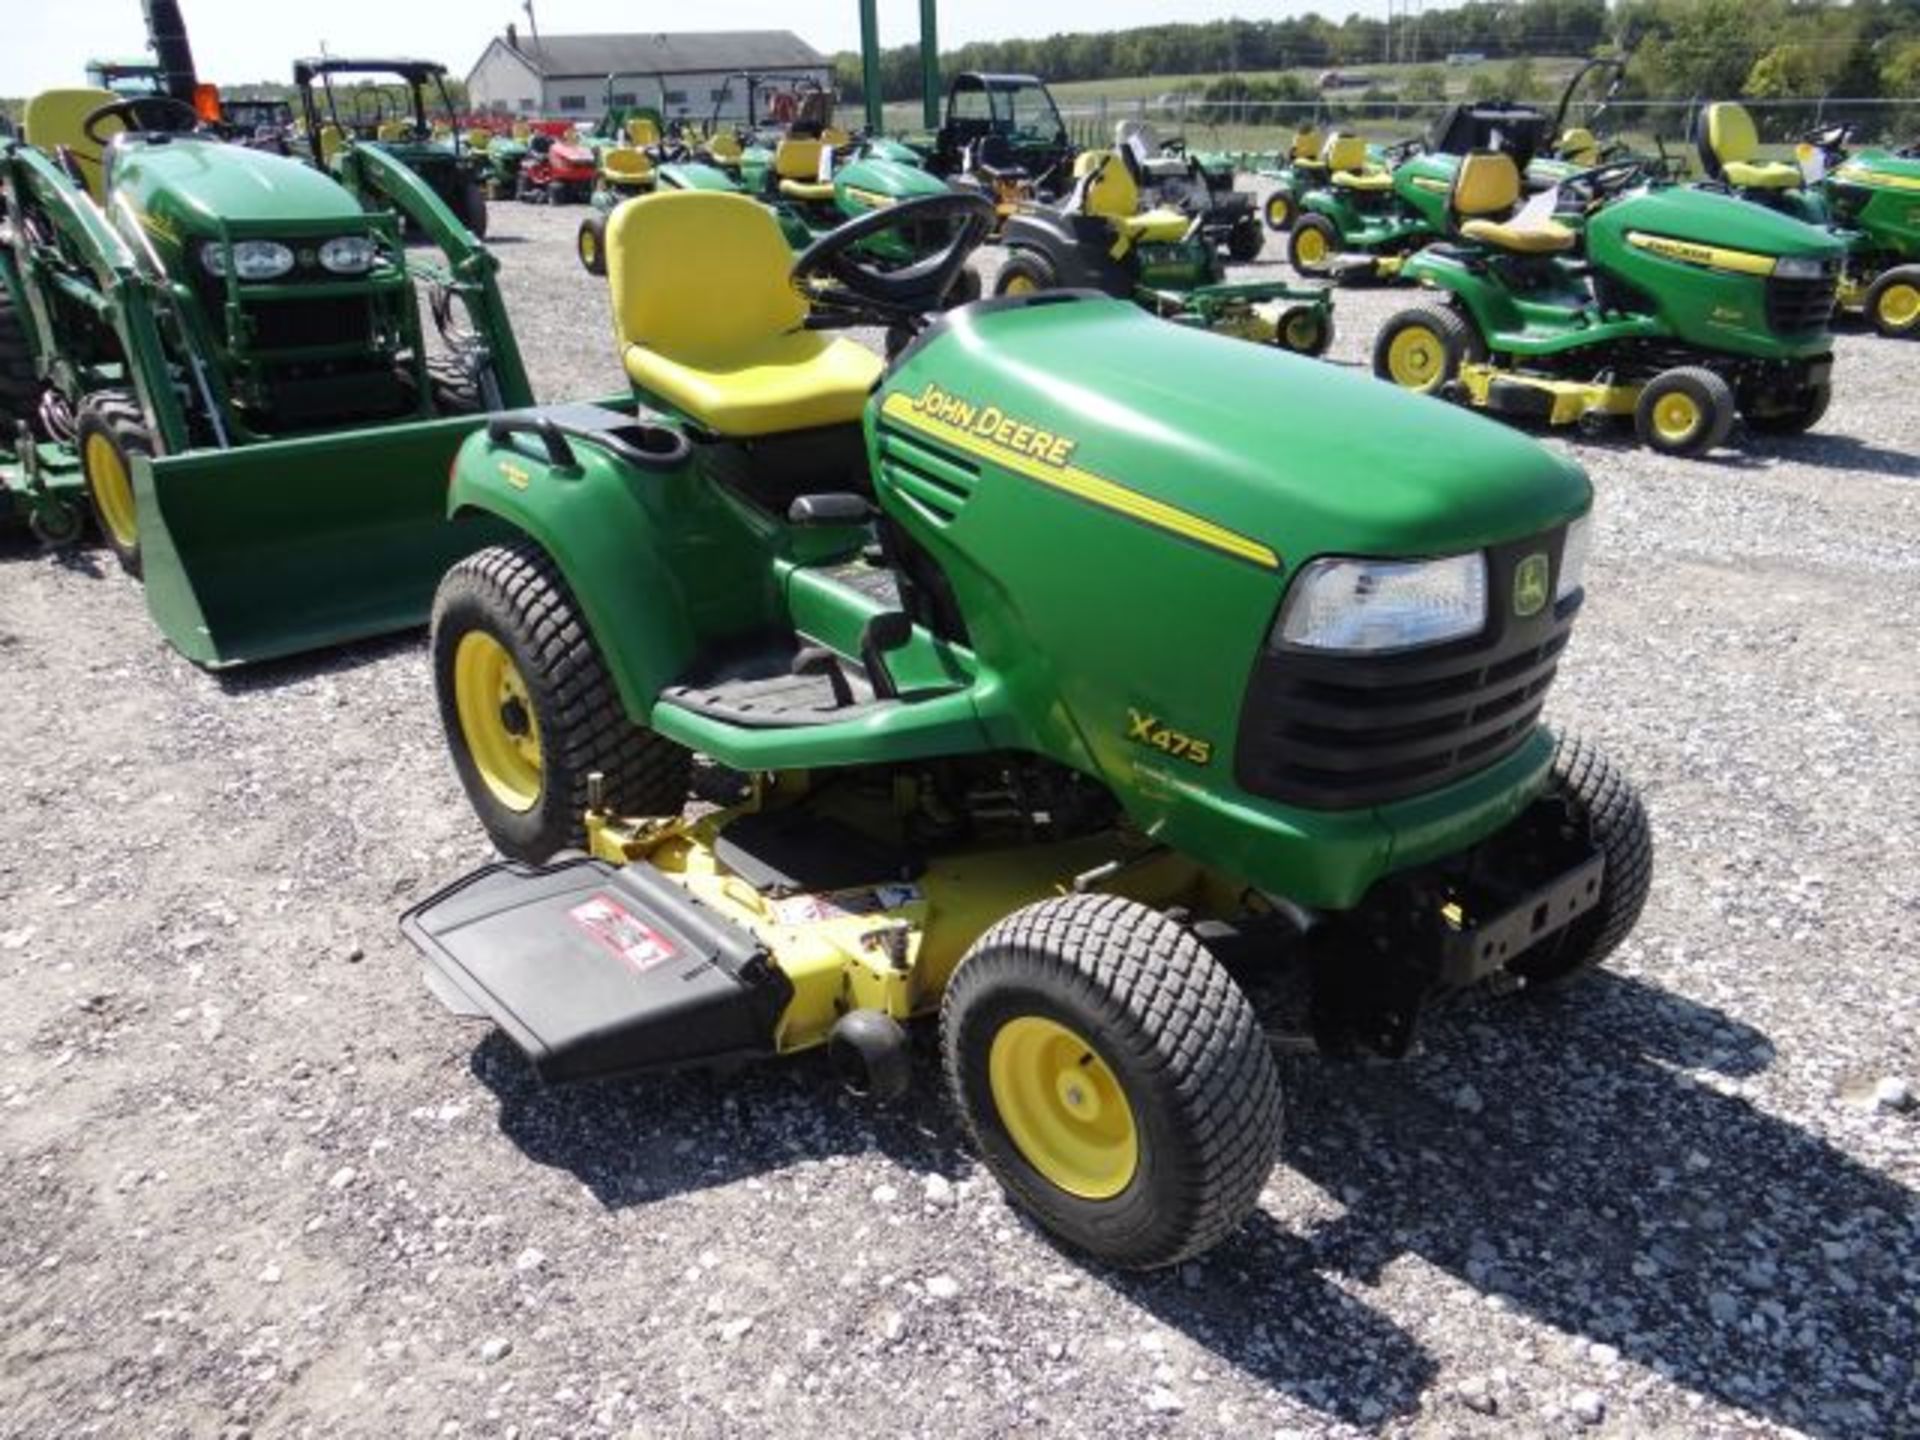 2005 JD X475 AWS Mower 623 hrs, 23hp Kawasaki V-Twin, Water Cooled, Hydro Power Steering, Diff Lock, - Image 2 of 4